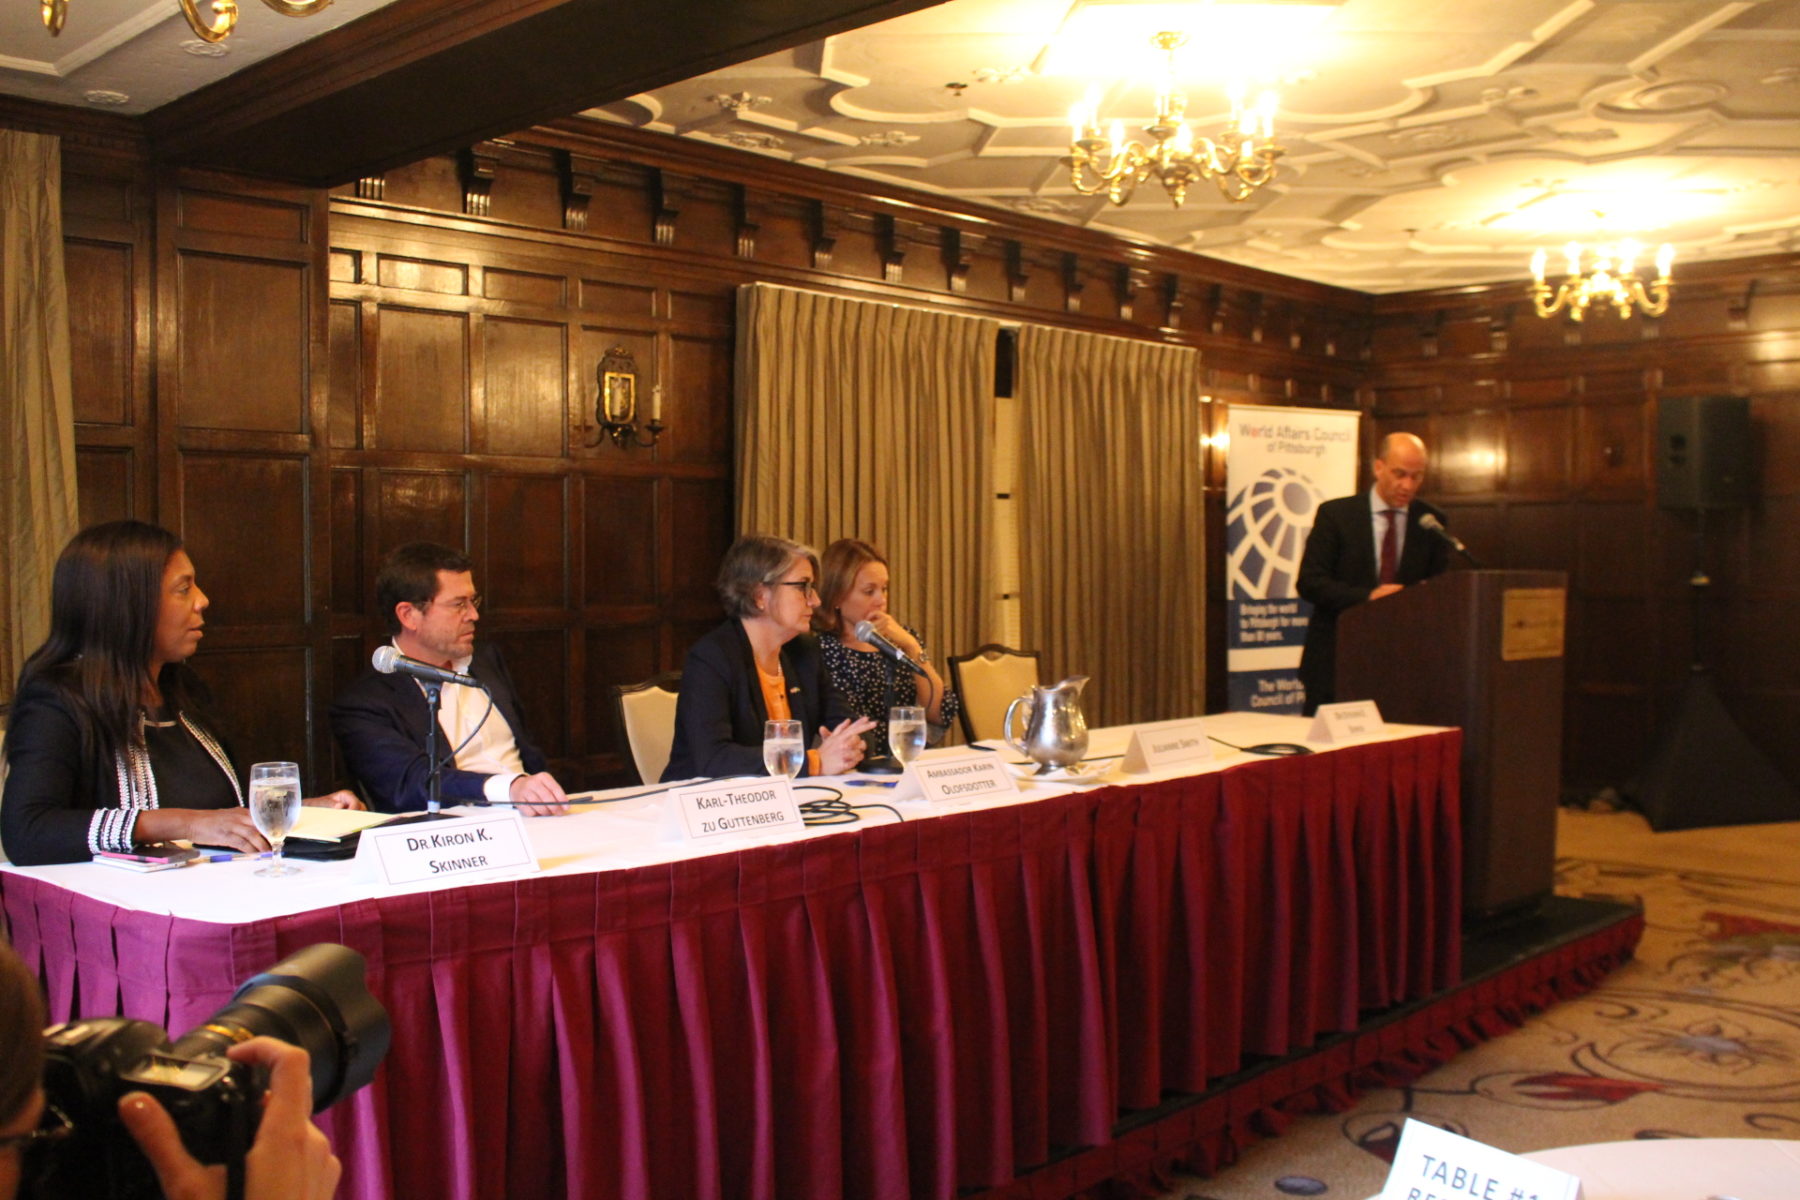 October 19- Dr. Kiron Skinner, Karl-Theodor zu Guttenberg, Ambassador Karin Olofsdotter, Julianne Smith, and Dr. Steven Sokol take part in a public event at the Omni William Penn Hotel co-hosted with the World Affairs Council of Pittsburgh. 